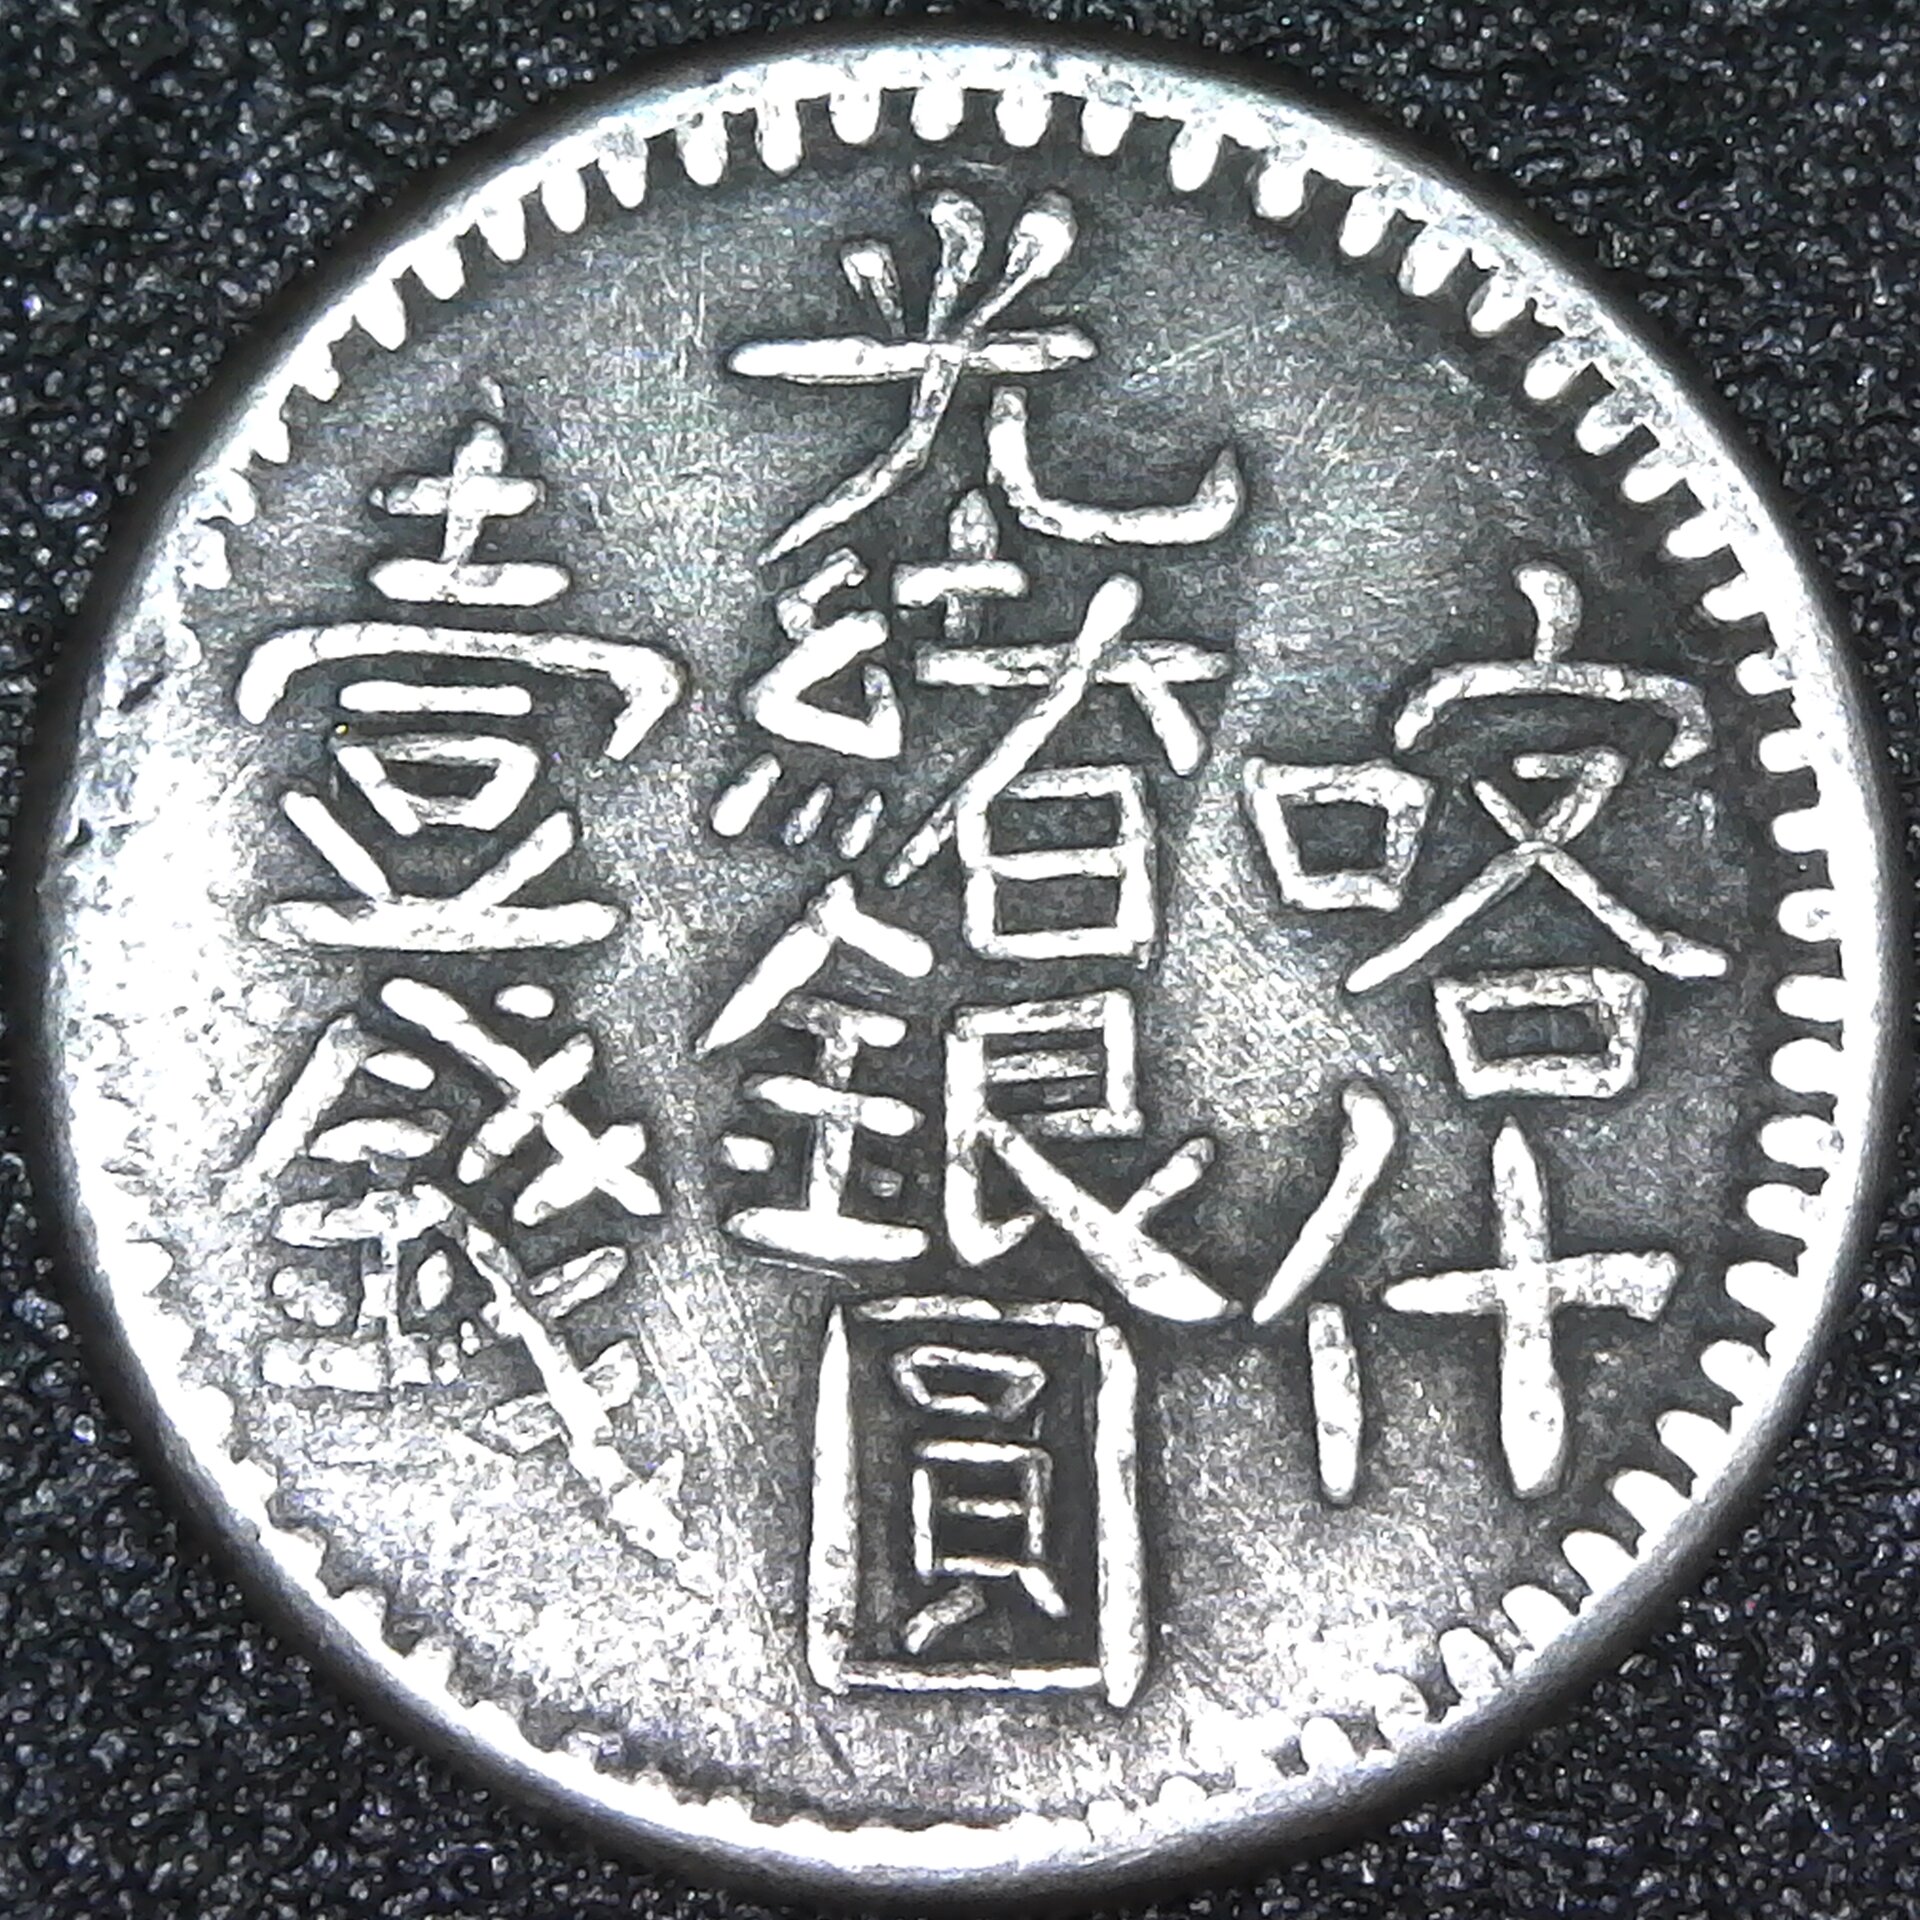 China Sinkiang 1 Miscal mule or forgery Y16  - YB16 1311 obv A.jpg